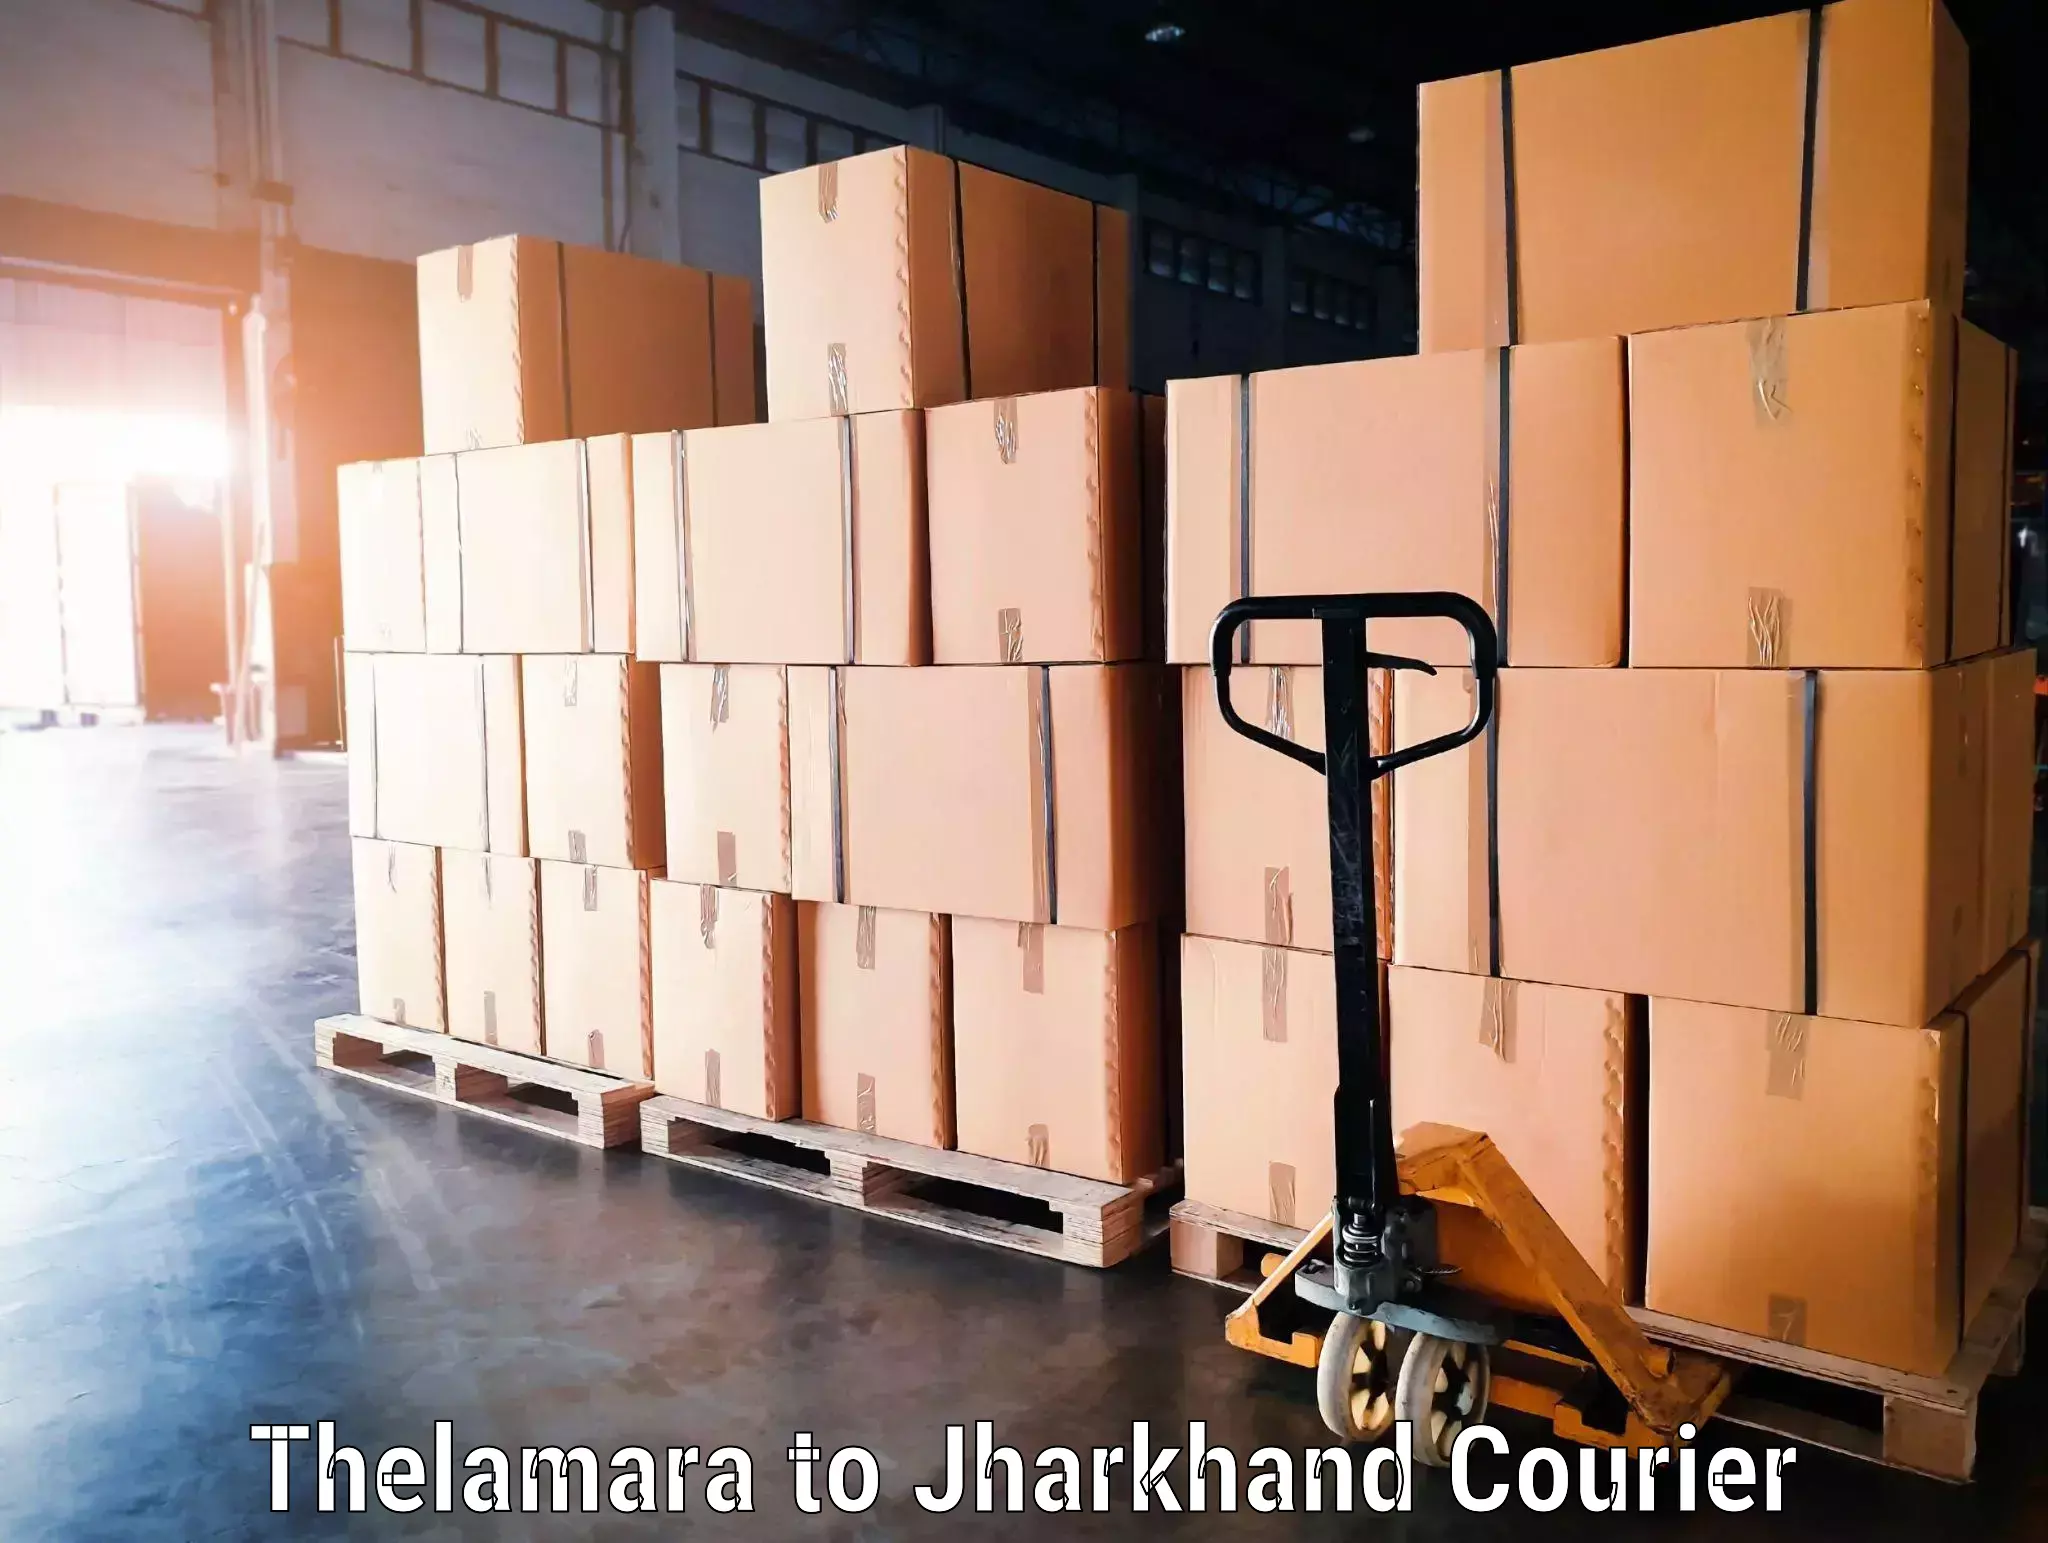 Baggage relocation service Thelamara to Jharkhand